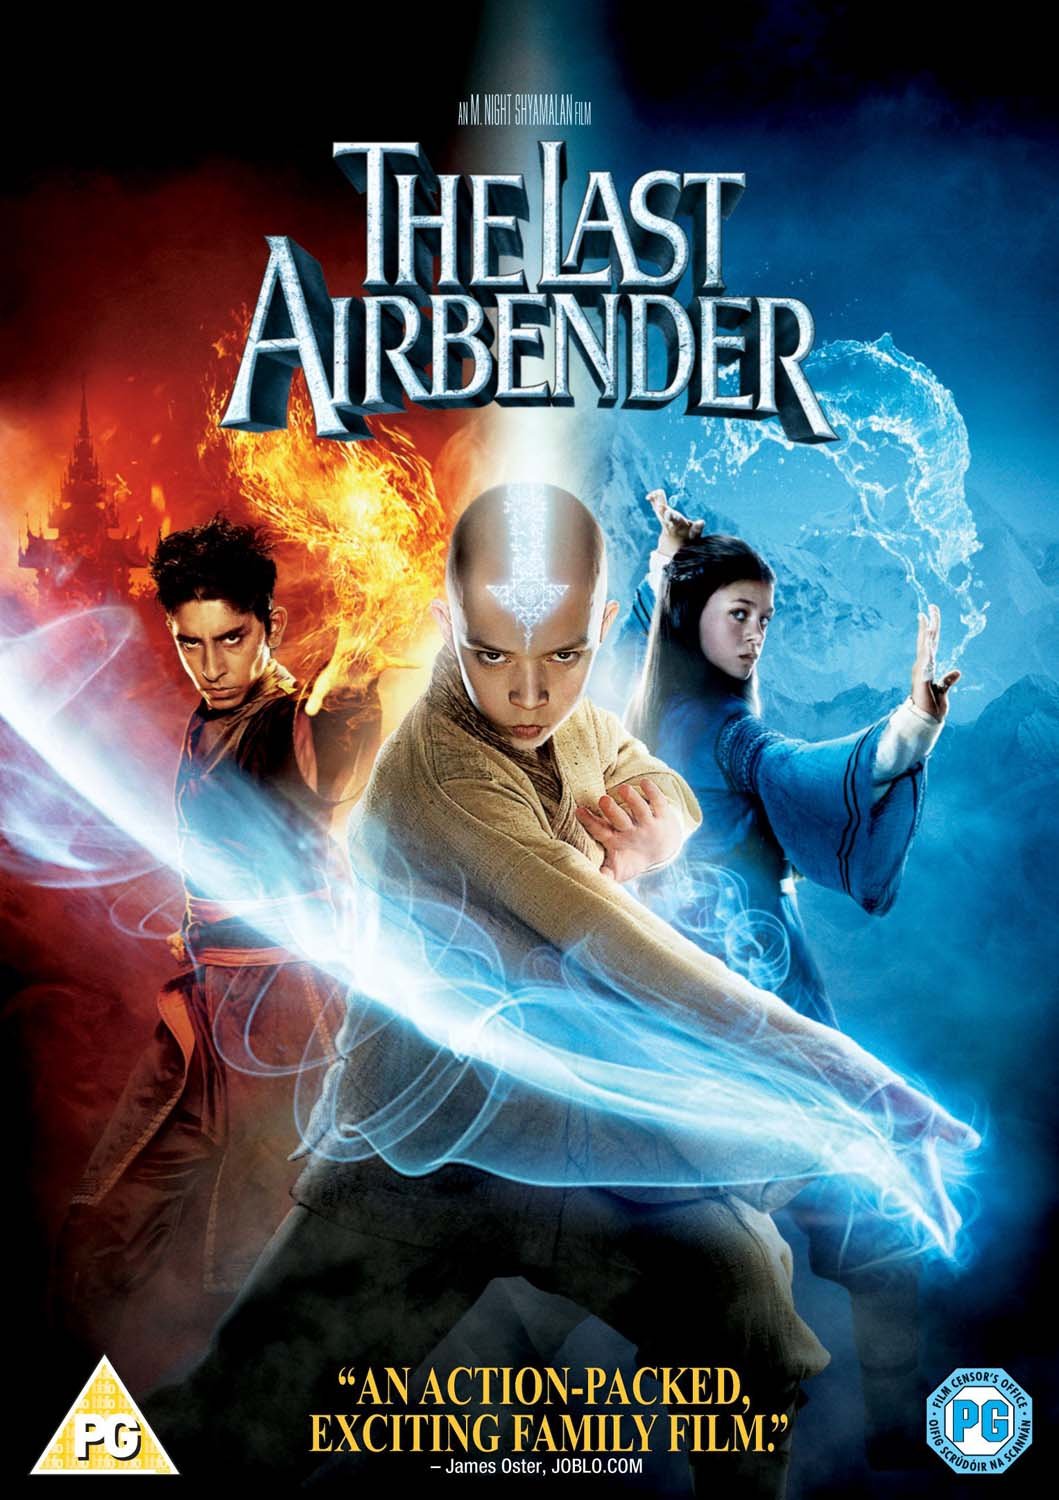 last airbender dvd - Mombat Sannolanen Thelast Airbender Censor'S Office An ActionPacked, Exciting Family Film. To Film Fg Escrudoves Pg James Oster, Joblo.Com